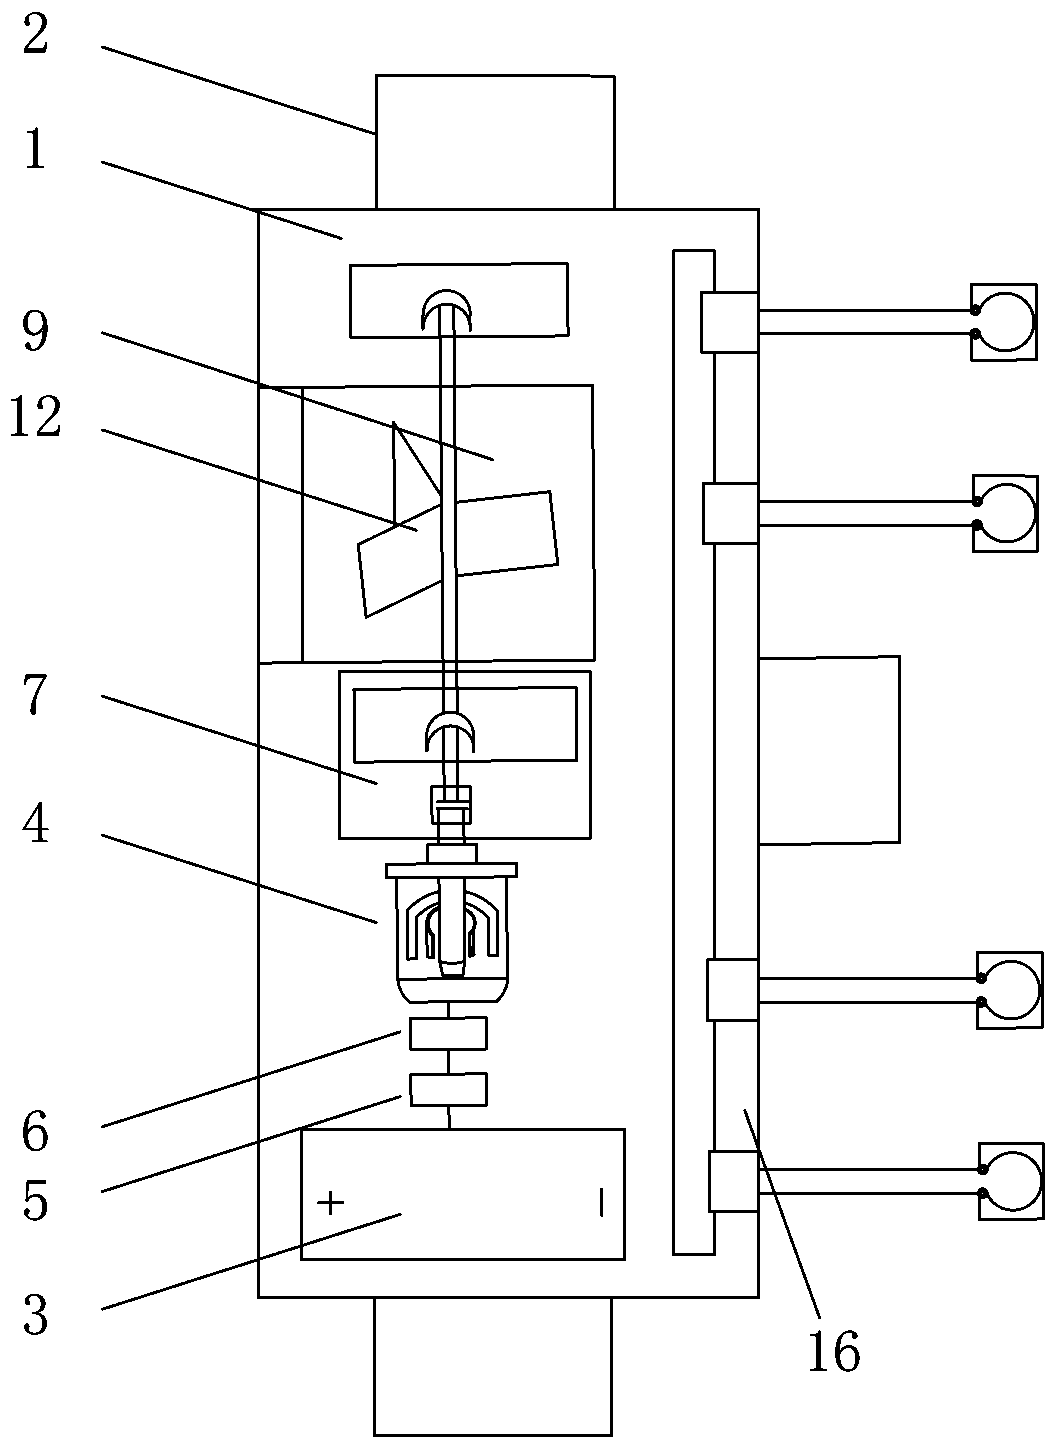 Semi-submersible ocean power generation method and device